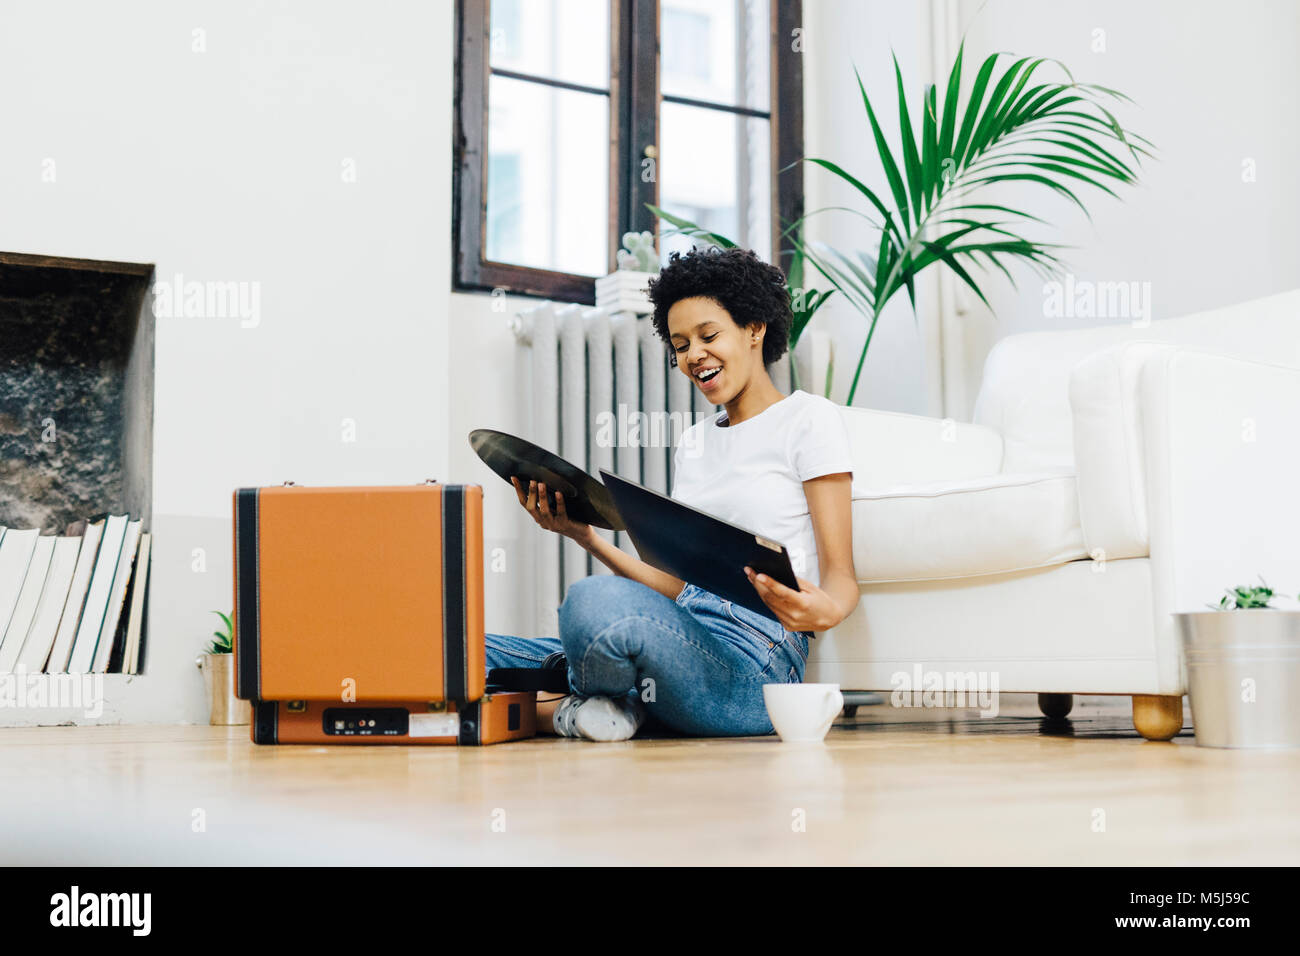 Young woman sitting on grounf listening music from record player Stock Photo